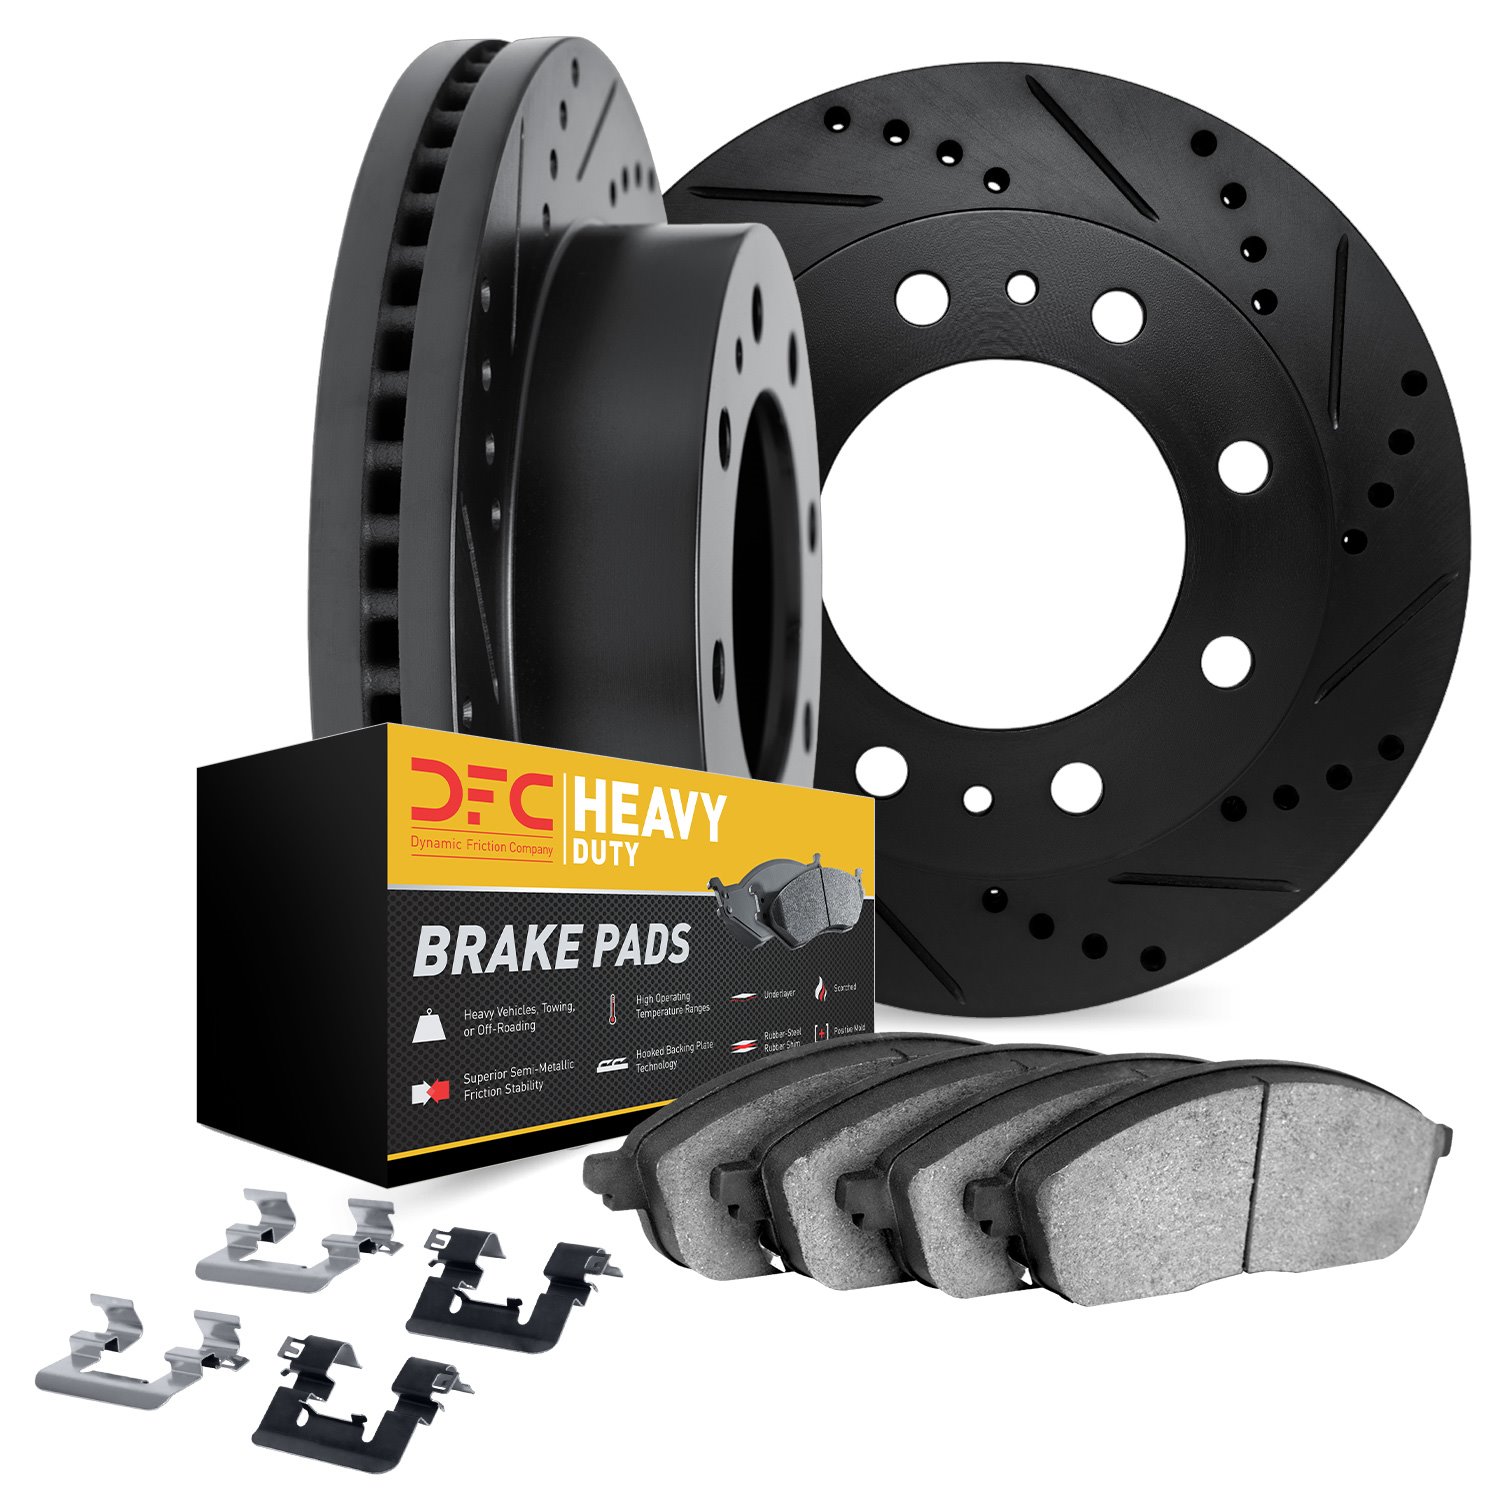 8212-99221 Drilled/Slotted Rotors w/Heavy-Duty Brake Pads Kit & Hardware [Black], Fits Select Ford/Lincoln/Mercury/Mazda, Positi